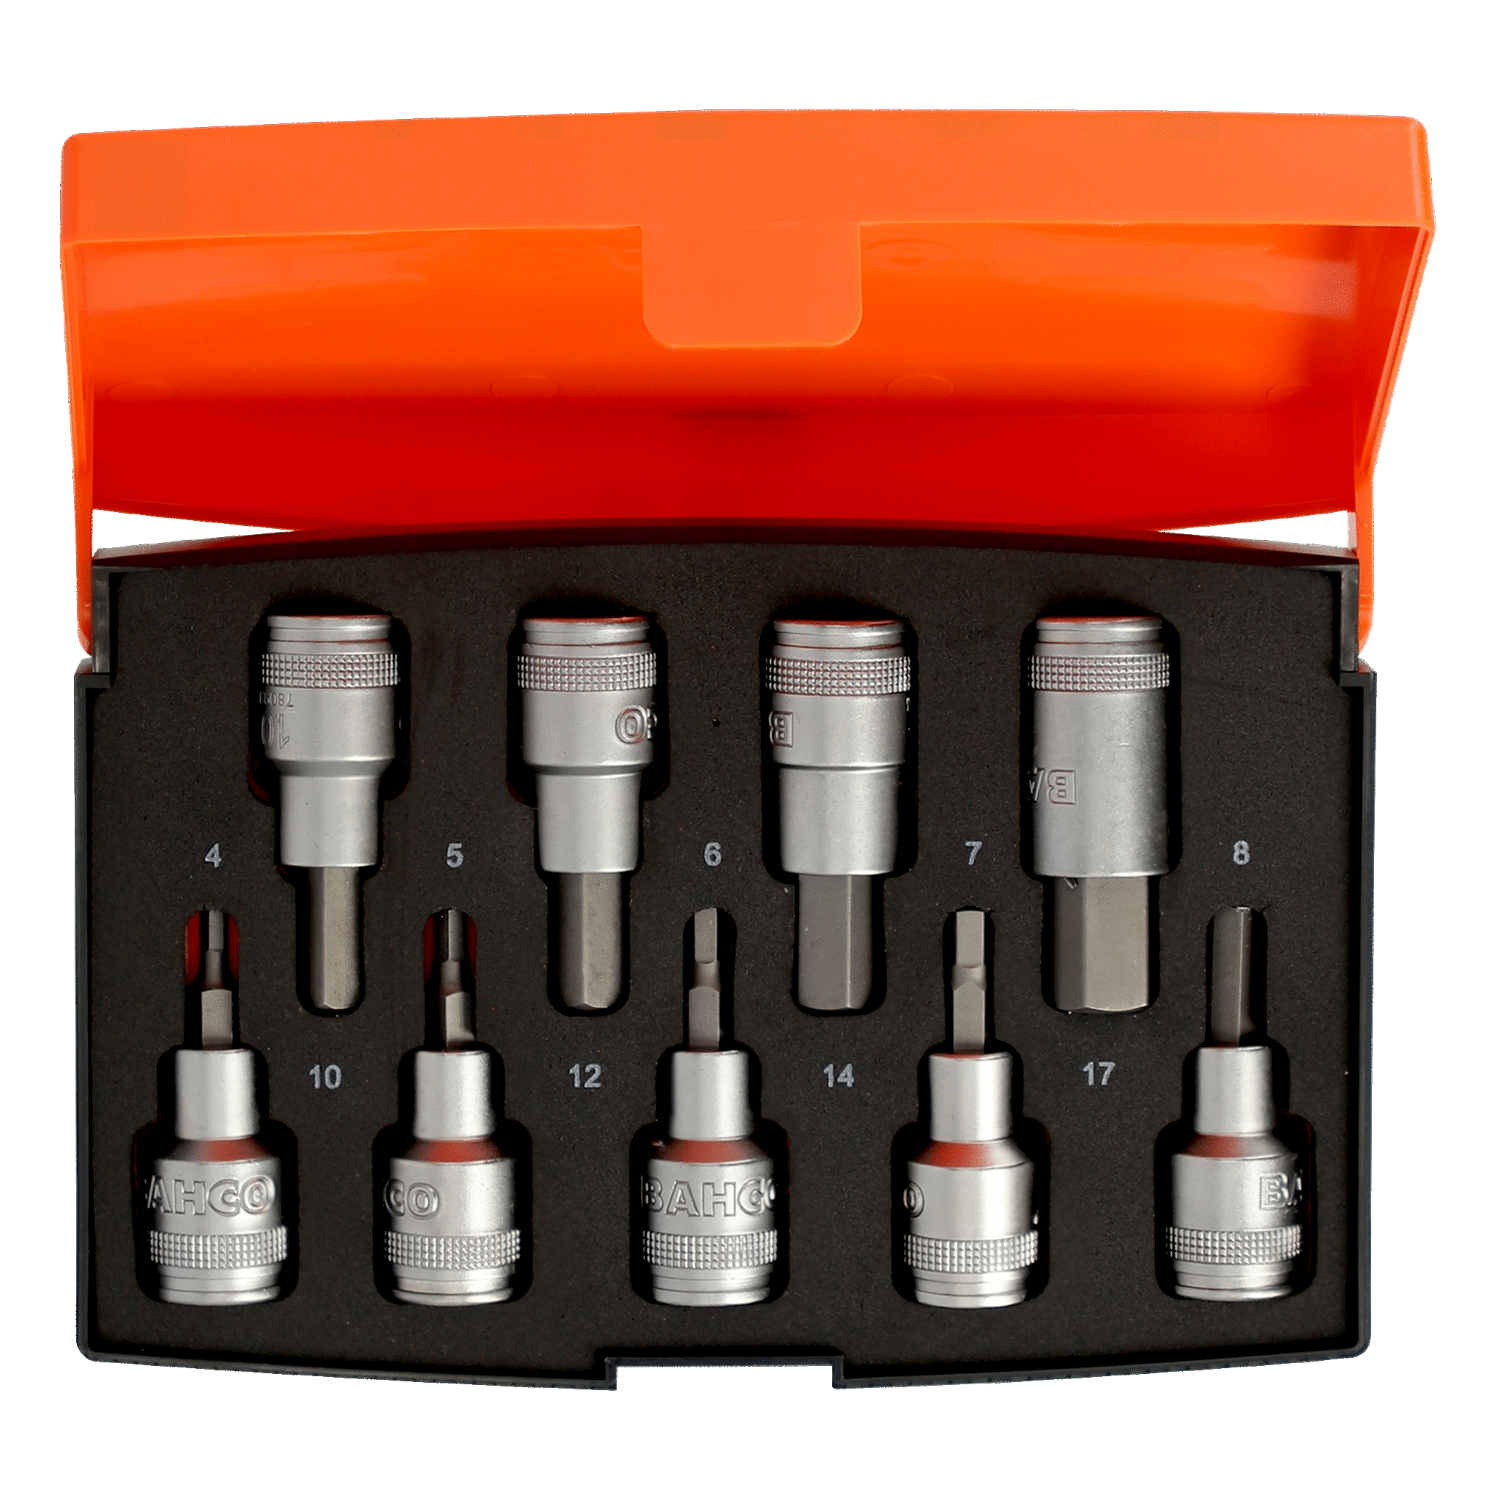 BAHCO S9HEX 1/2” Socket Set With Hex Bits - 9 Pcs (BAHCO Tools) - Premium Socket Set from BAHCO - Shop now at Yew Aik.